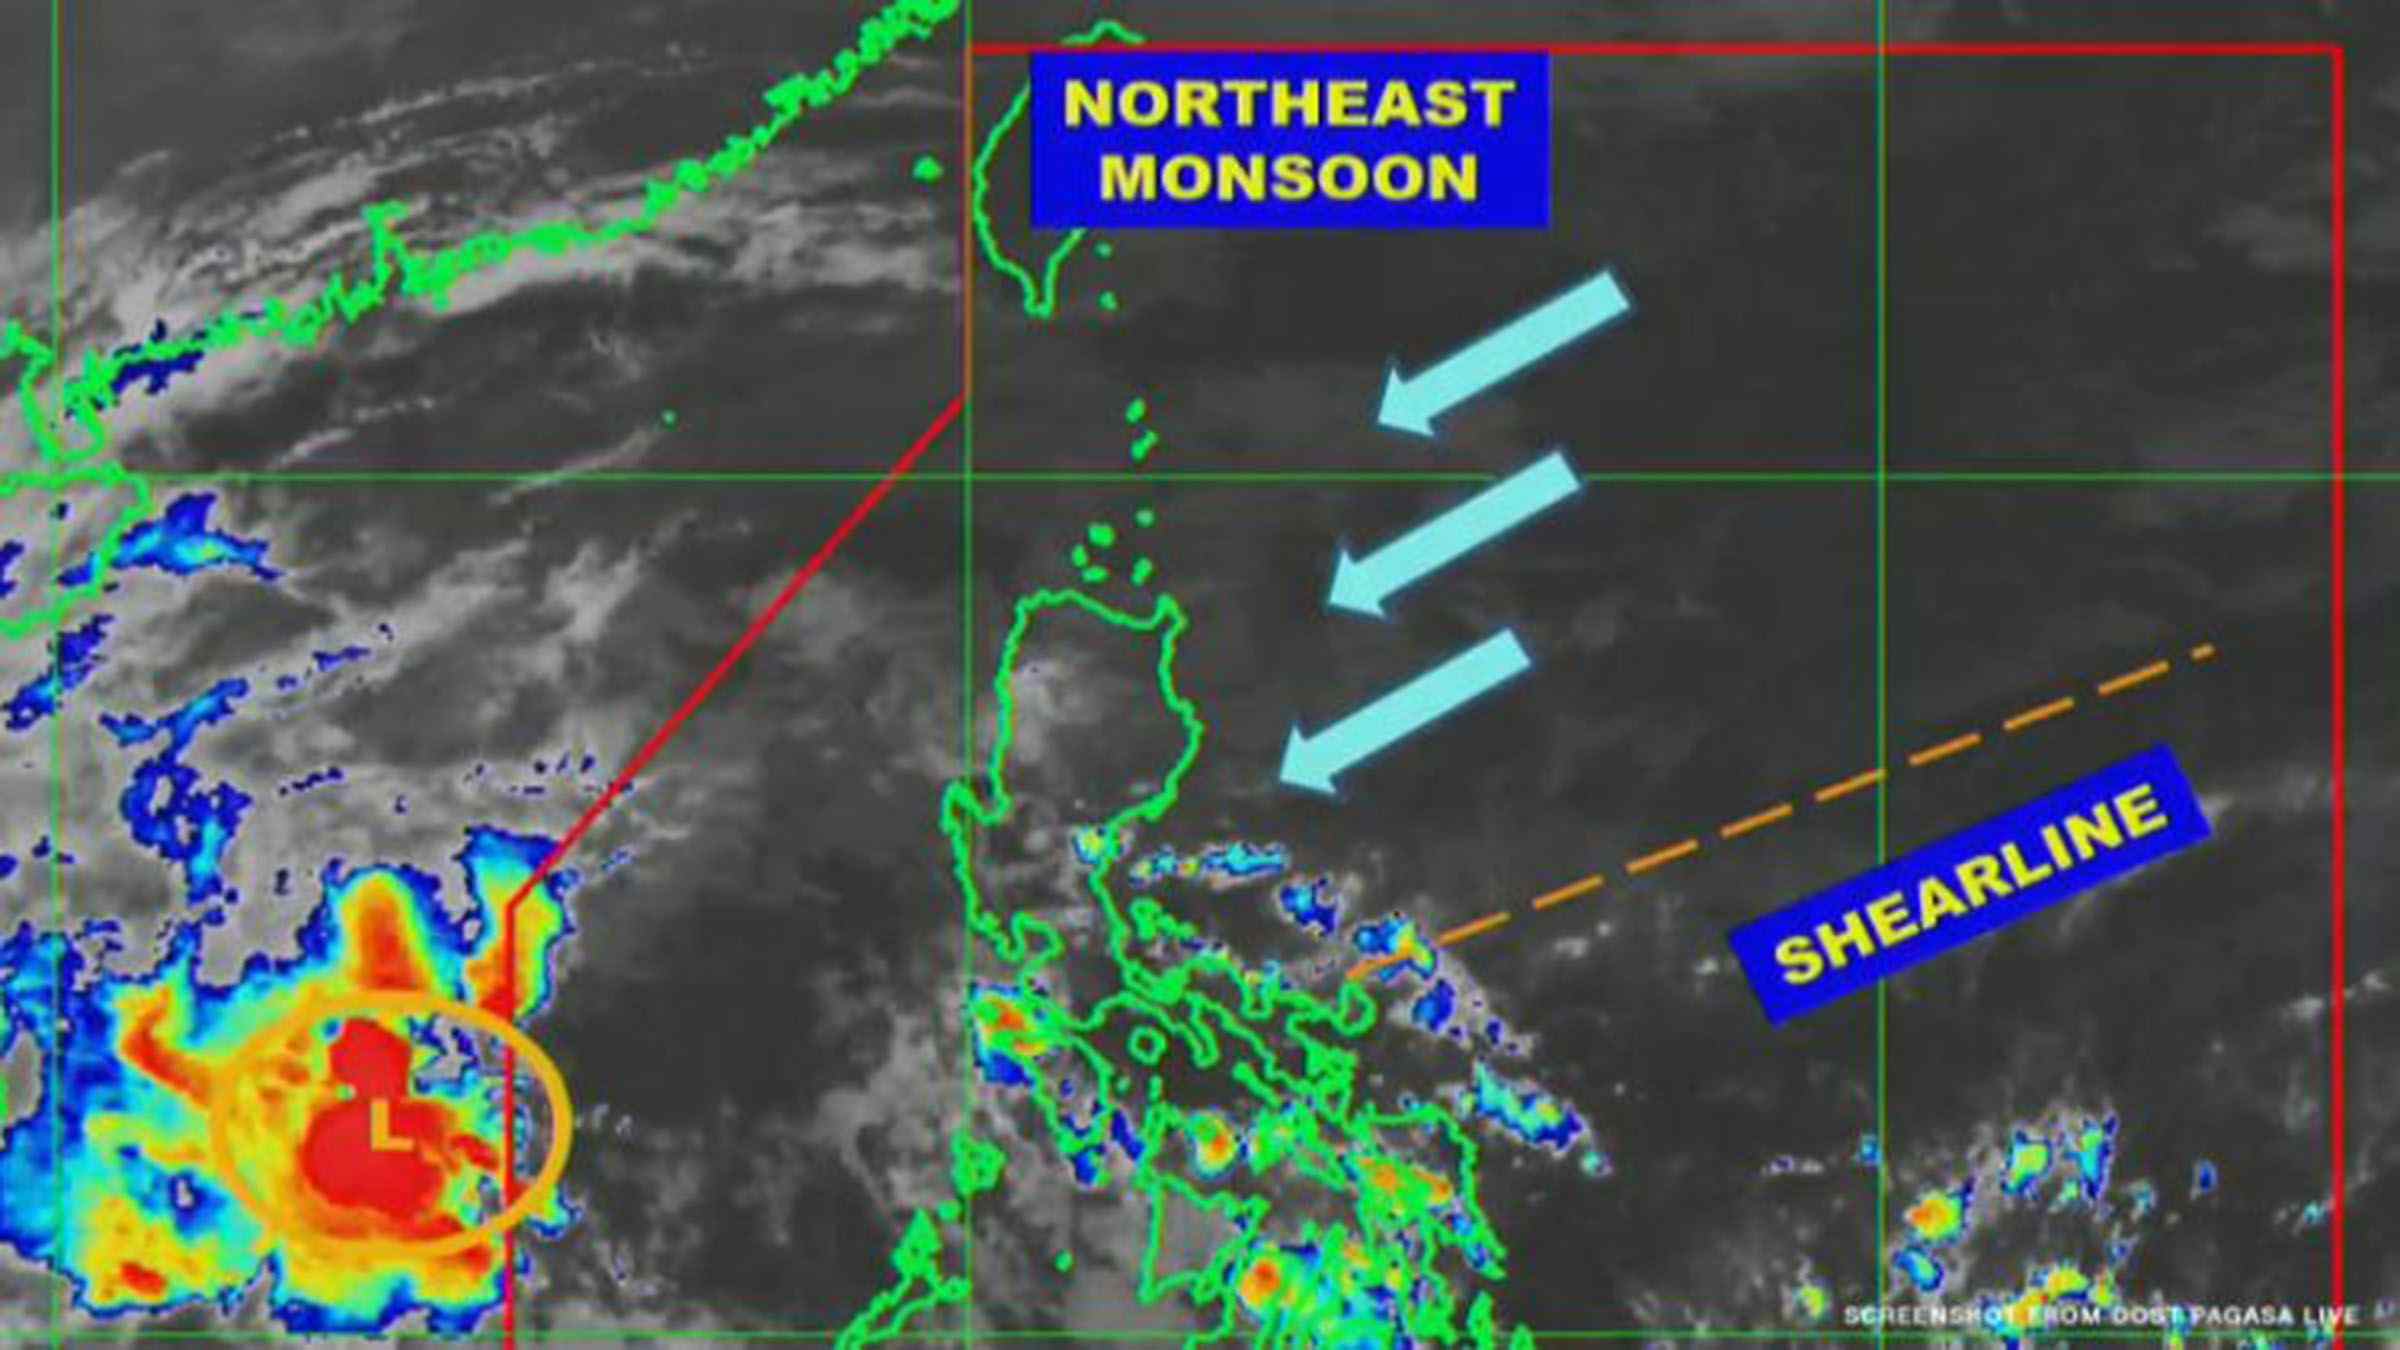 Rains in VisMin and parts of Luzon this weekend